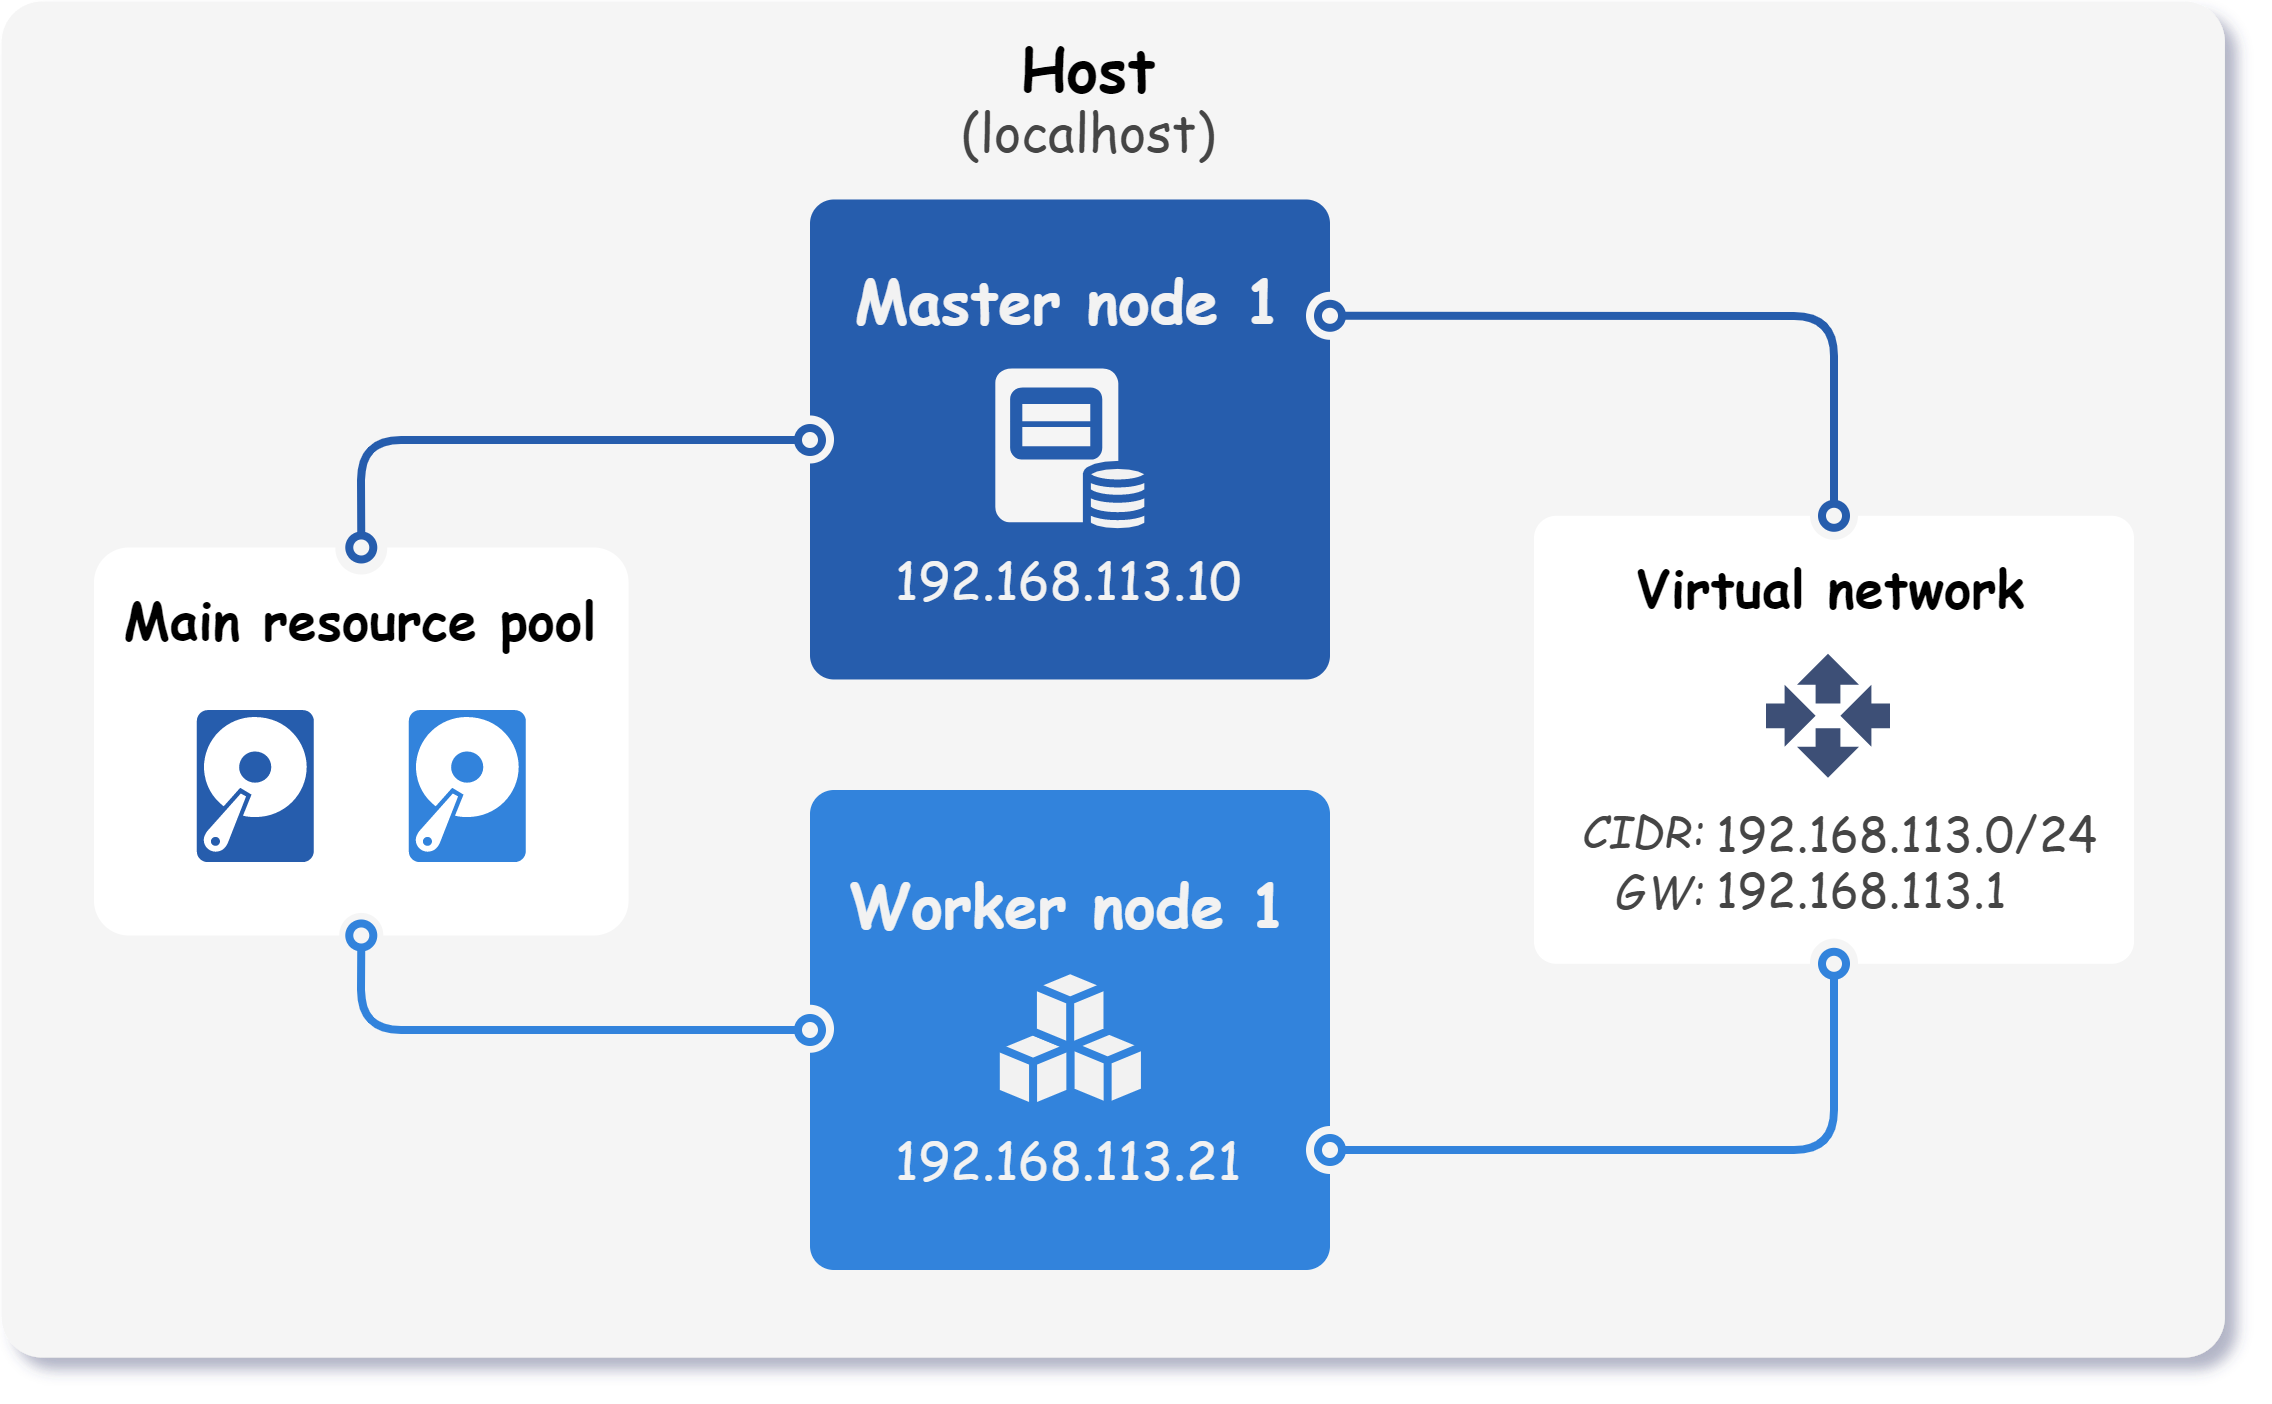 Architecture of the cluster with one master and one worker node